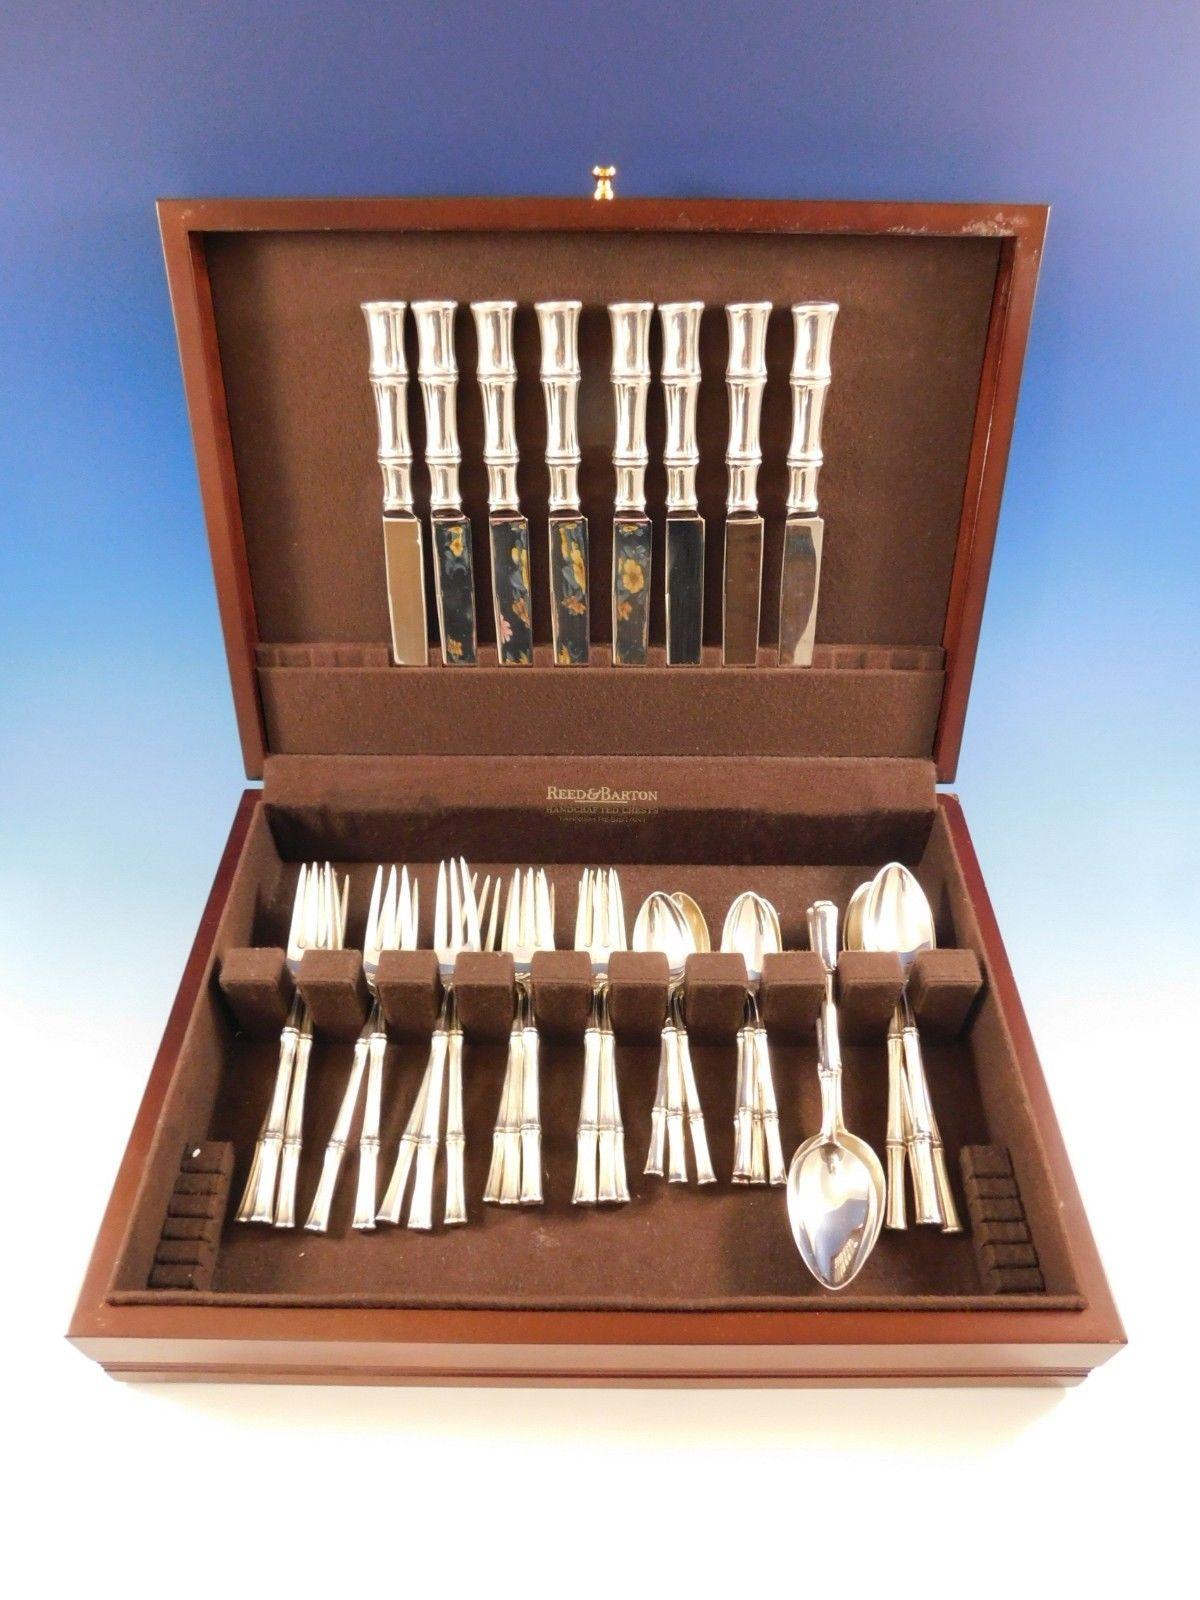 Bamboo by Tiffany & Co. sterling silver flatware set, 40 pieces. This set includes:

8 dinner knives, 9 3/8